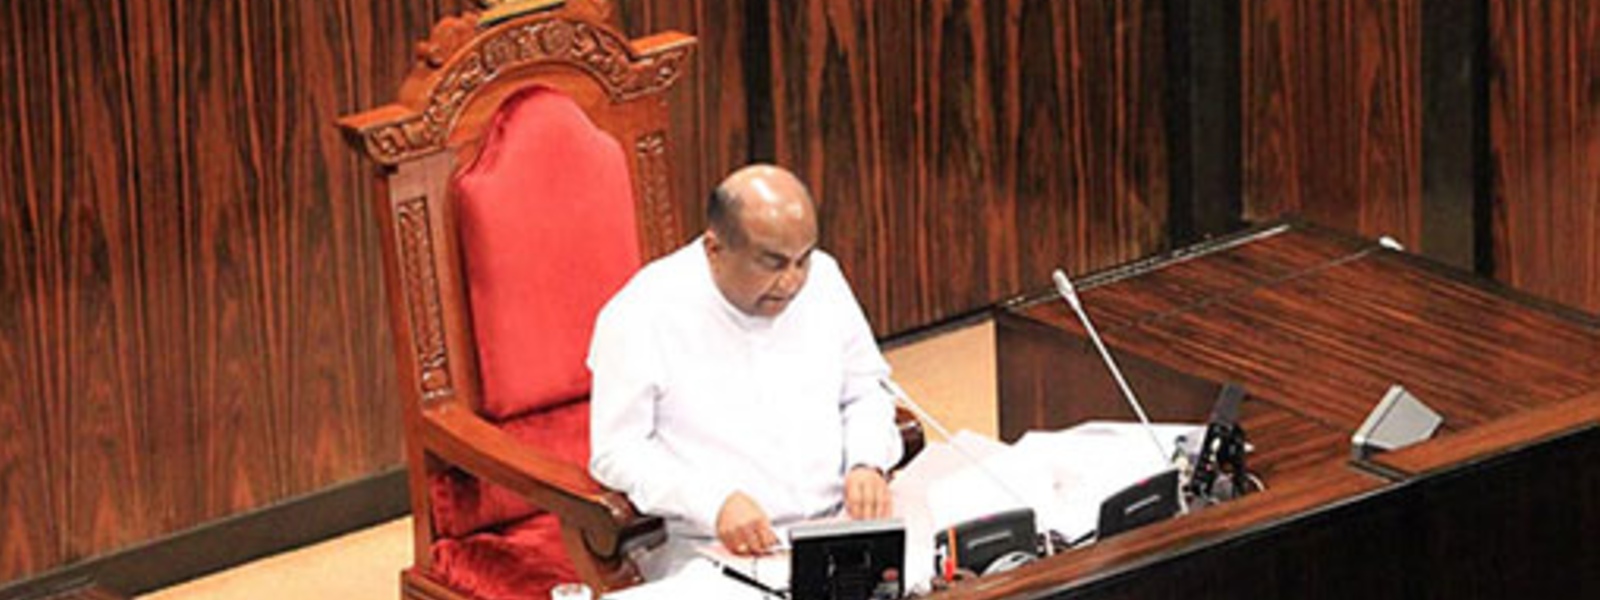 Support government’s efforts to control COVID-19 : Speaker